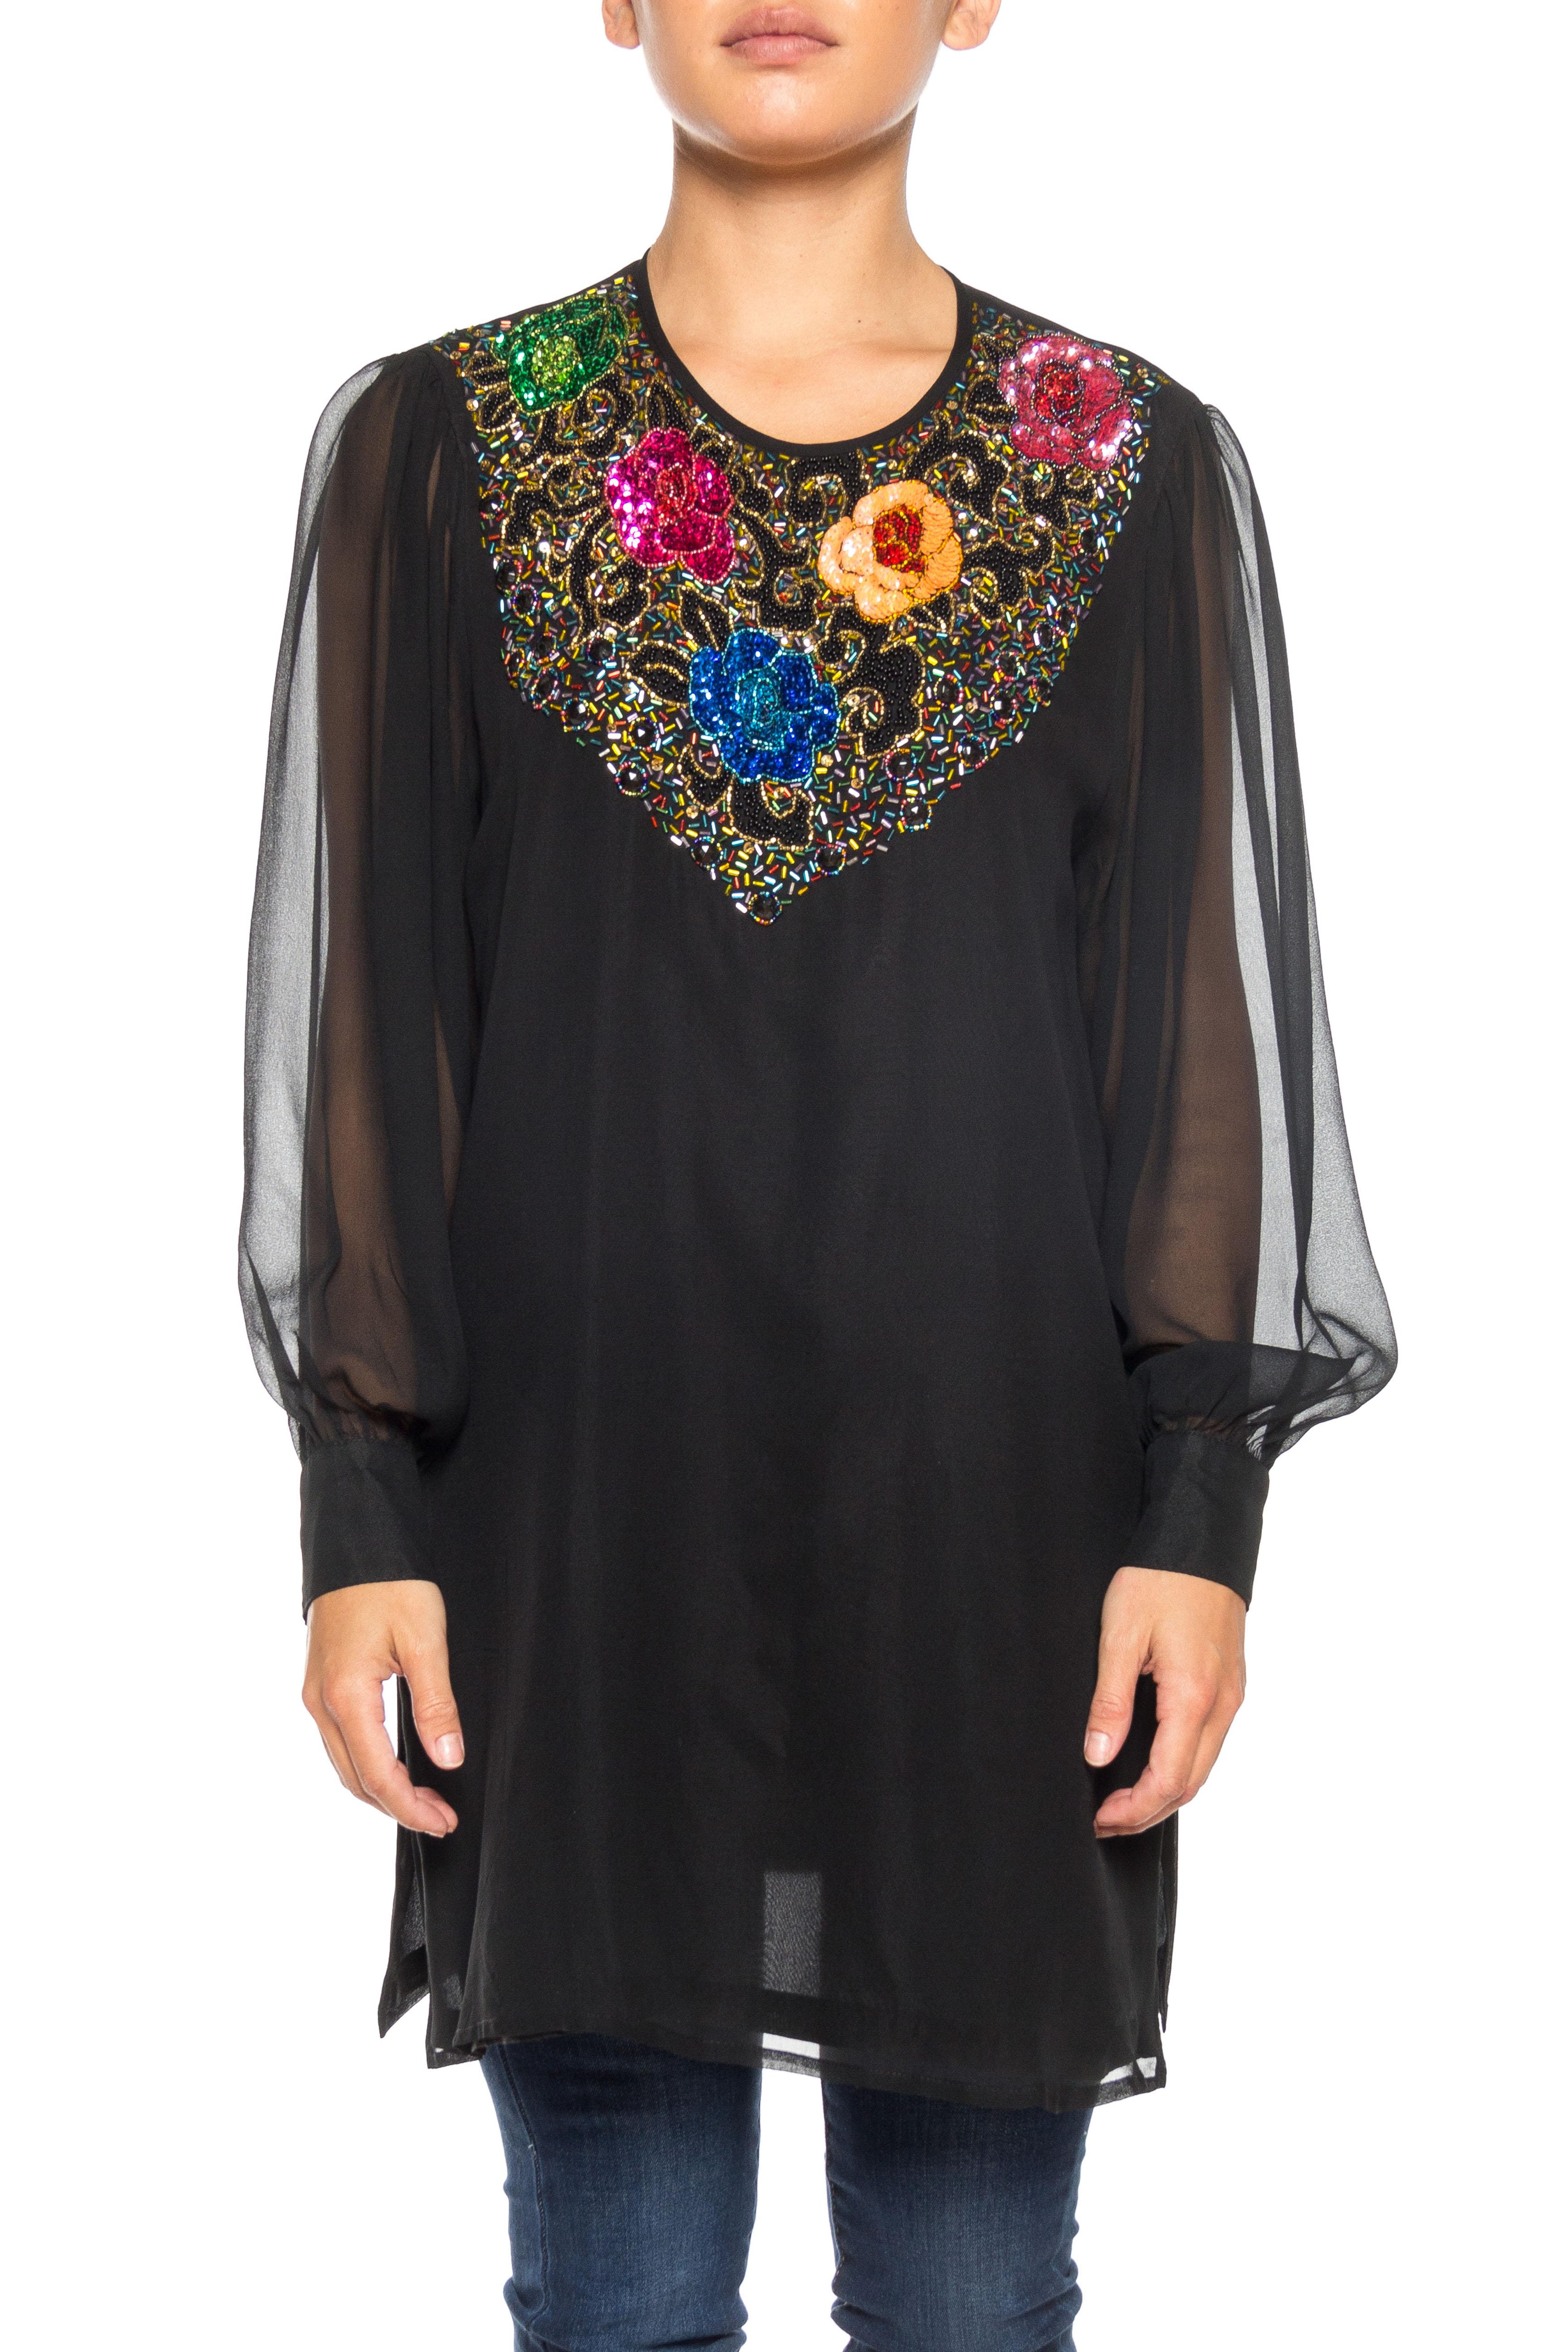 1980S DIANE FREIS Black Beaded Silk Chiffon Cocktail Tunic Blouse With Sheer Sleeves